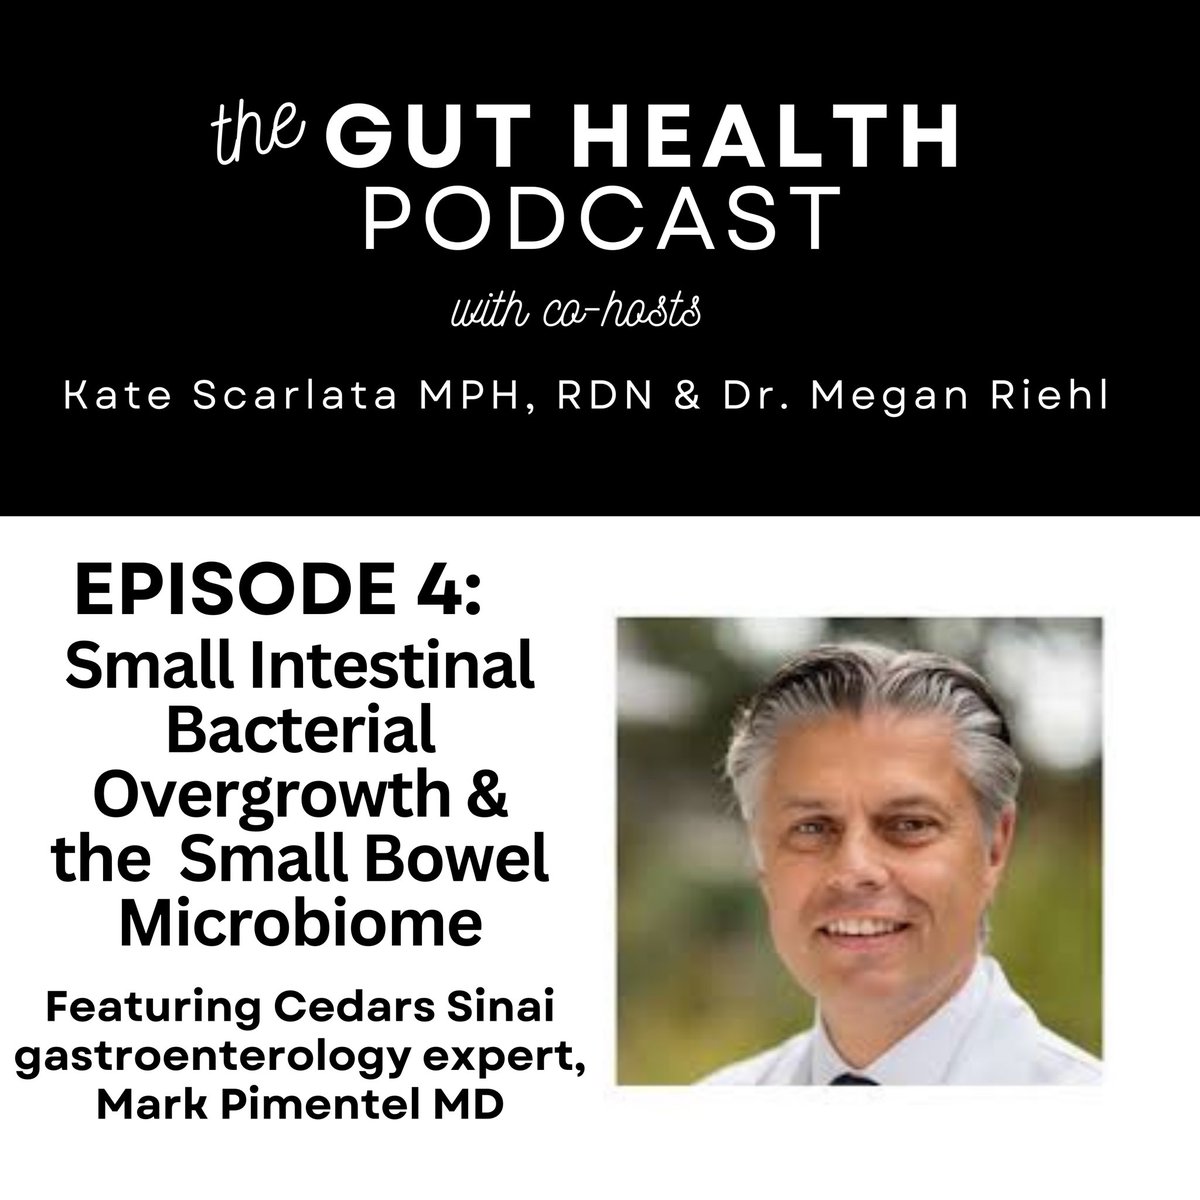 Have you checked out episode 4 of The Gut Health podcast? Learn the latest research from our expert guest @MarkPimentelMD. From key microbes that appear to be key players in -#SIBO to future therapeutic direction. Don’t miss this! Find here- buzzsprout.com/2293918/share